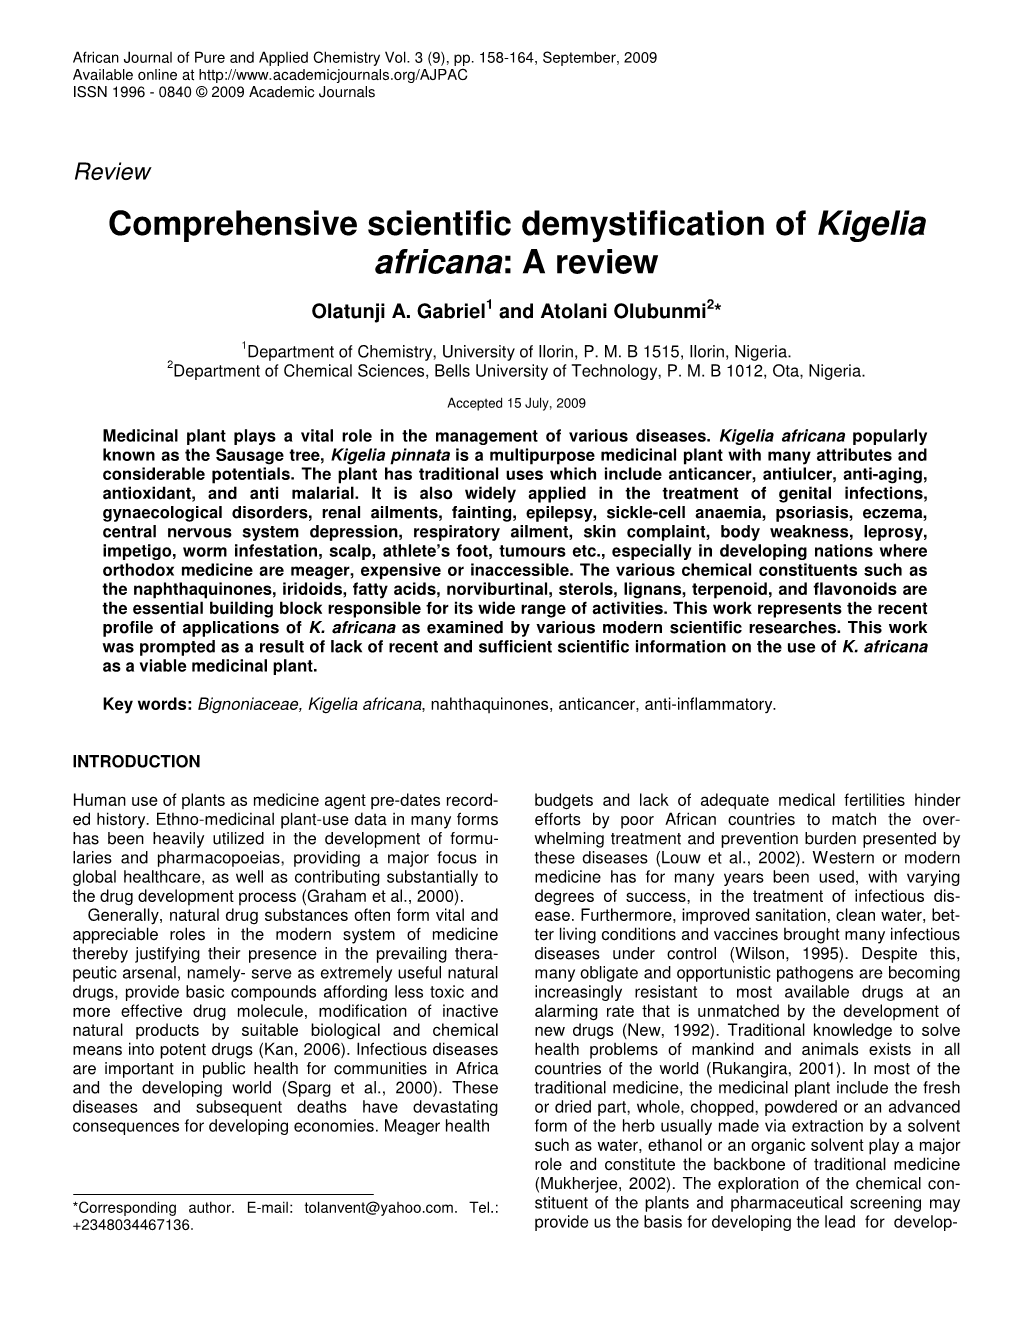 Comprehensive Scientific Demystification of Kigelia Africana: a Review